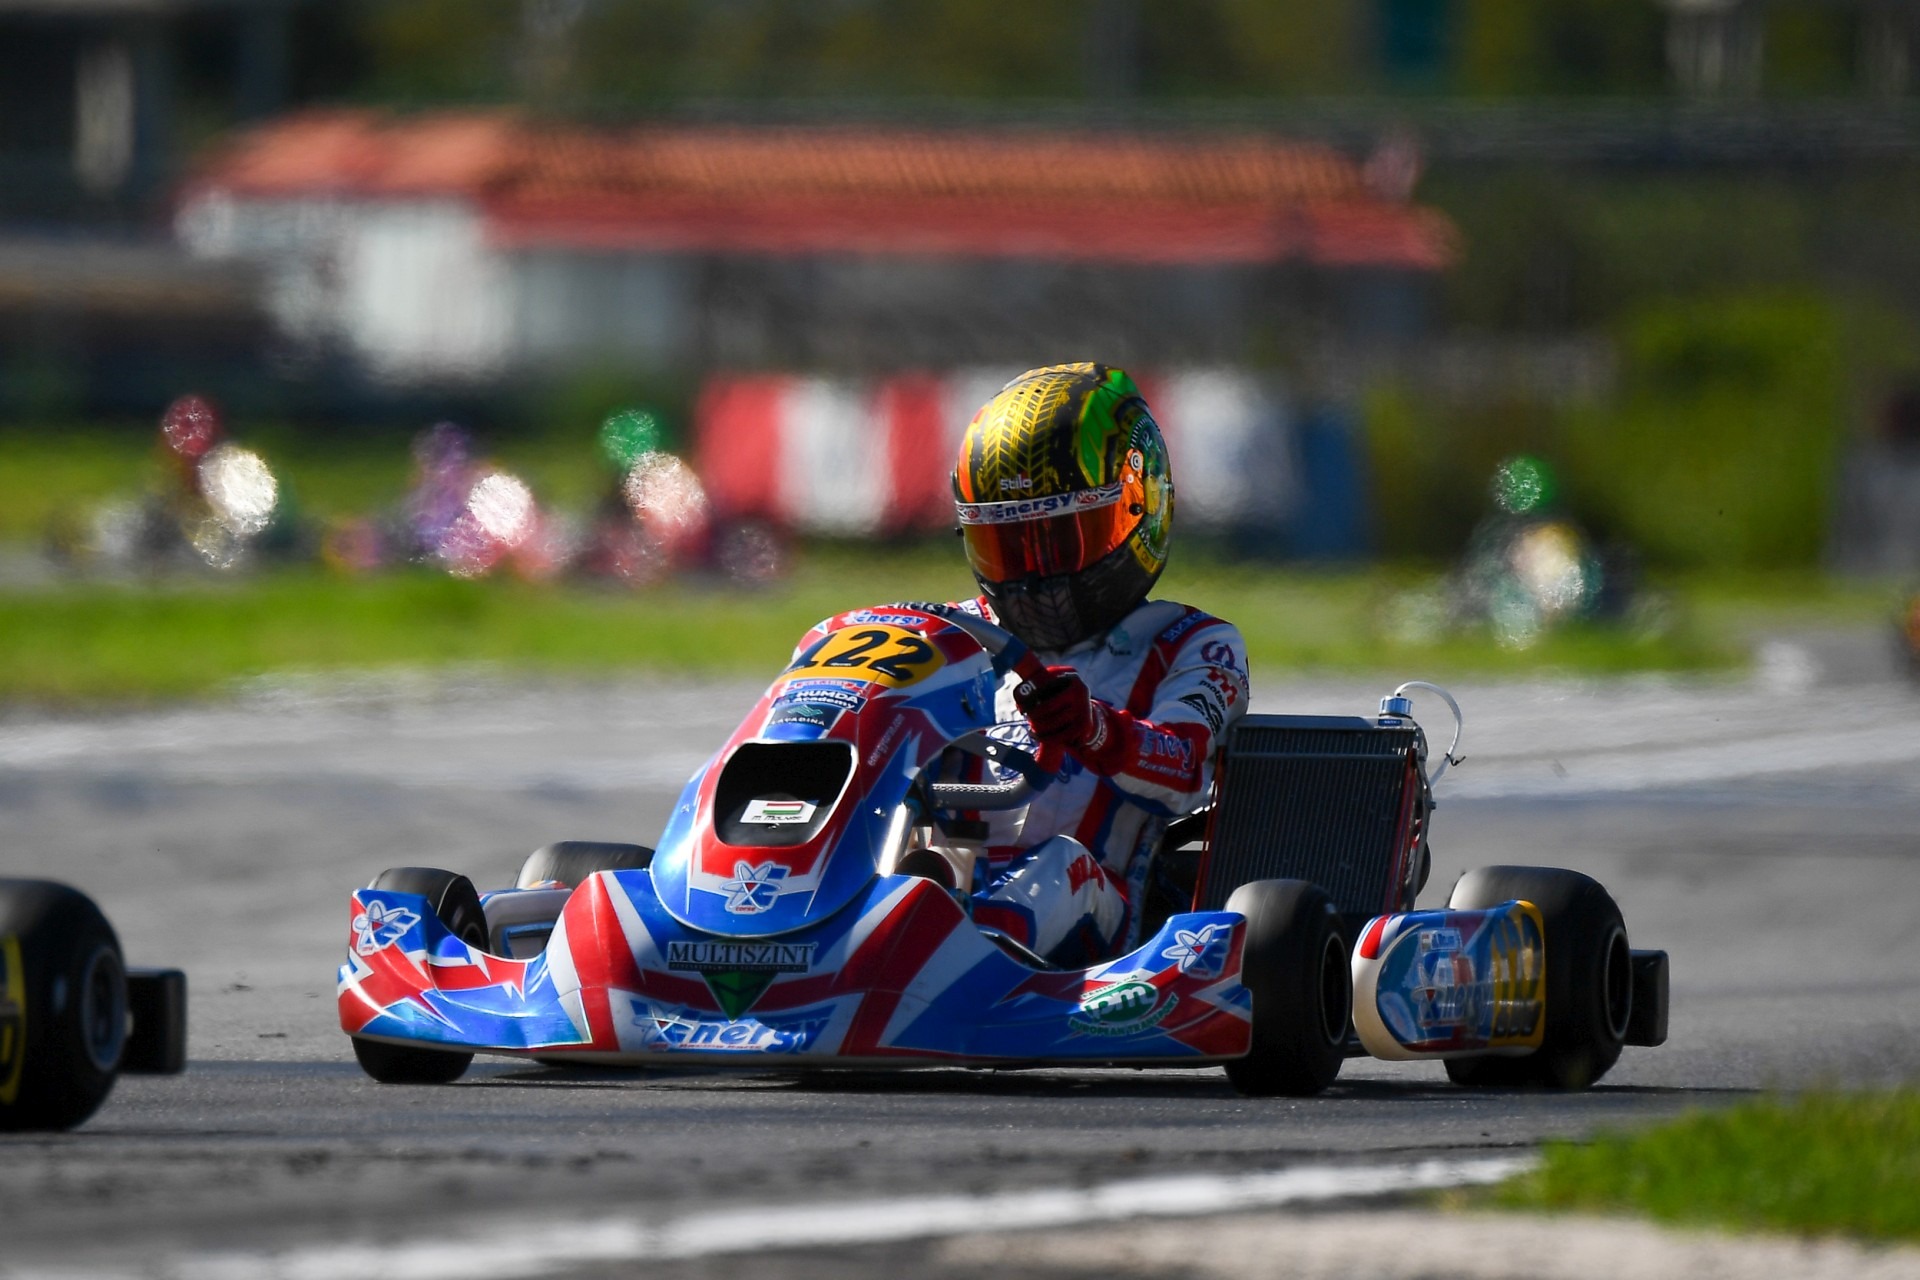 Martin Molnár won a Heat and finished 8th at the FIA Karting World Championship